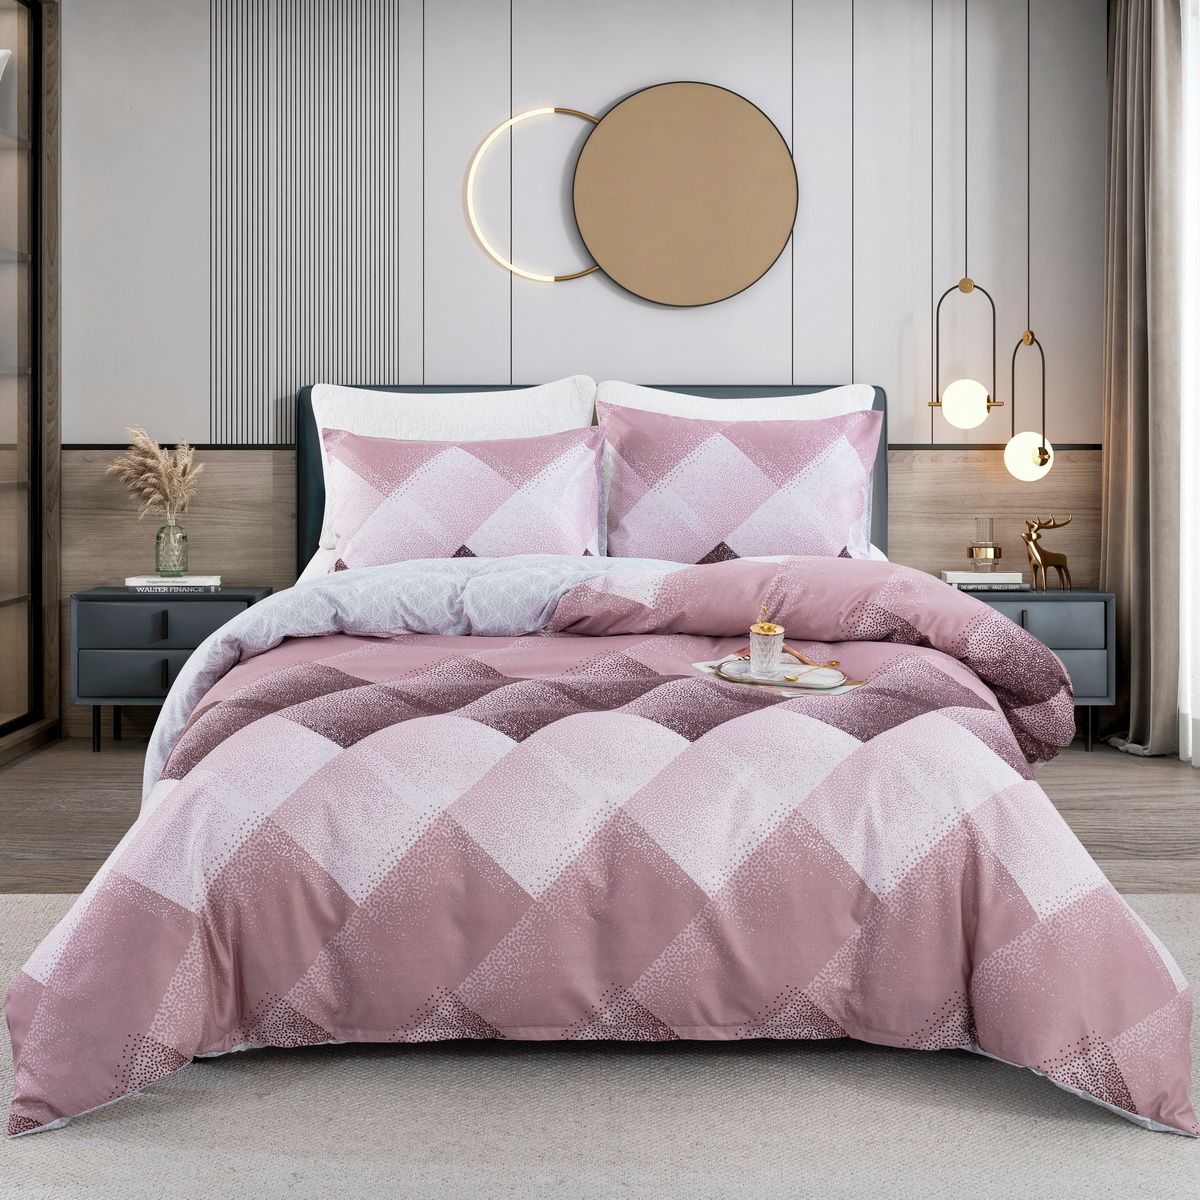 2/3pcs Comfortable and Soft Checkered Pattern Bedding Set